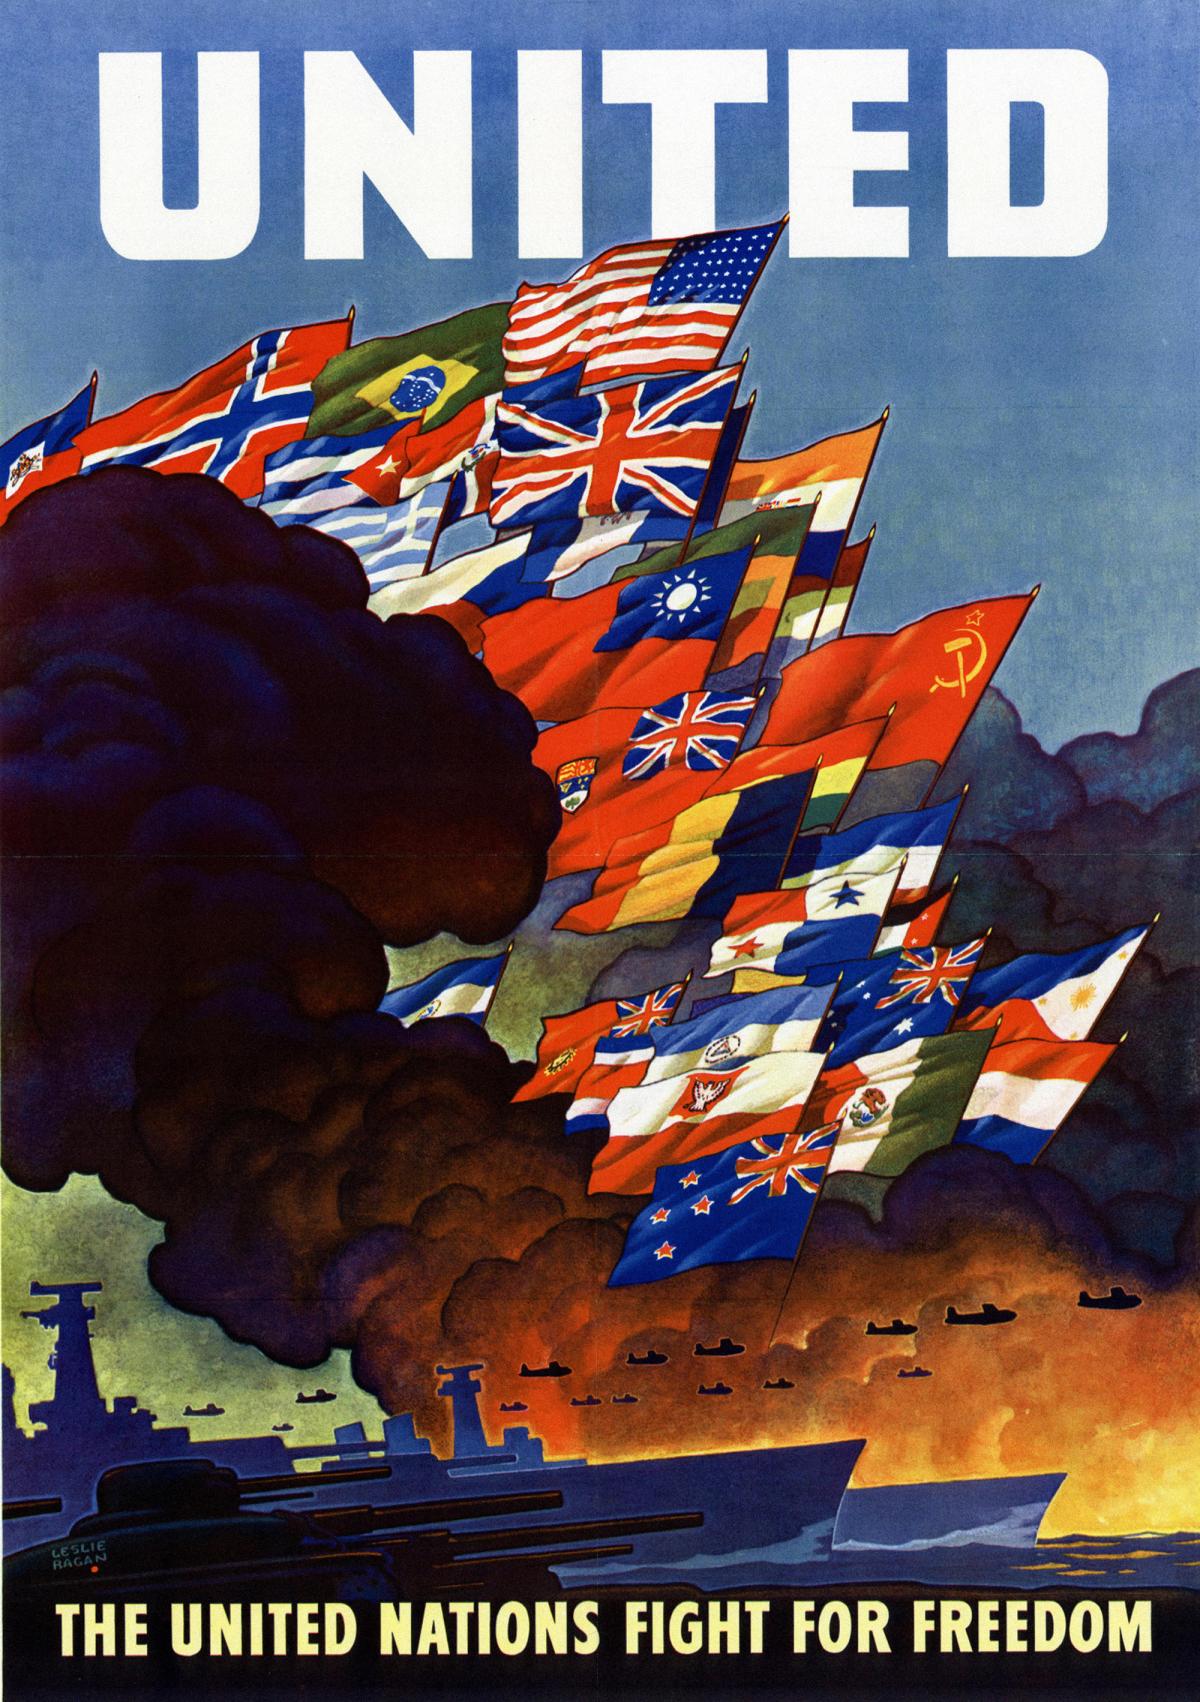 United Nations World War II poster of flags and battleships